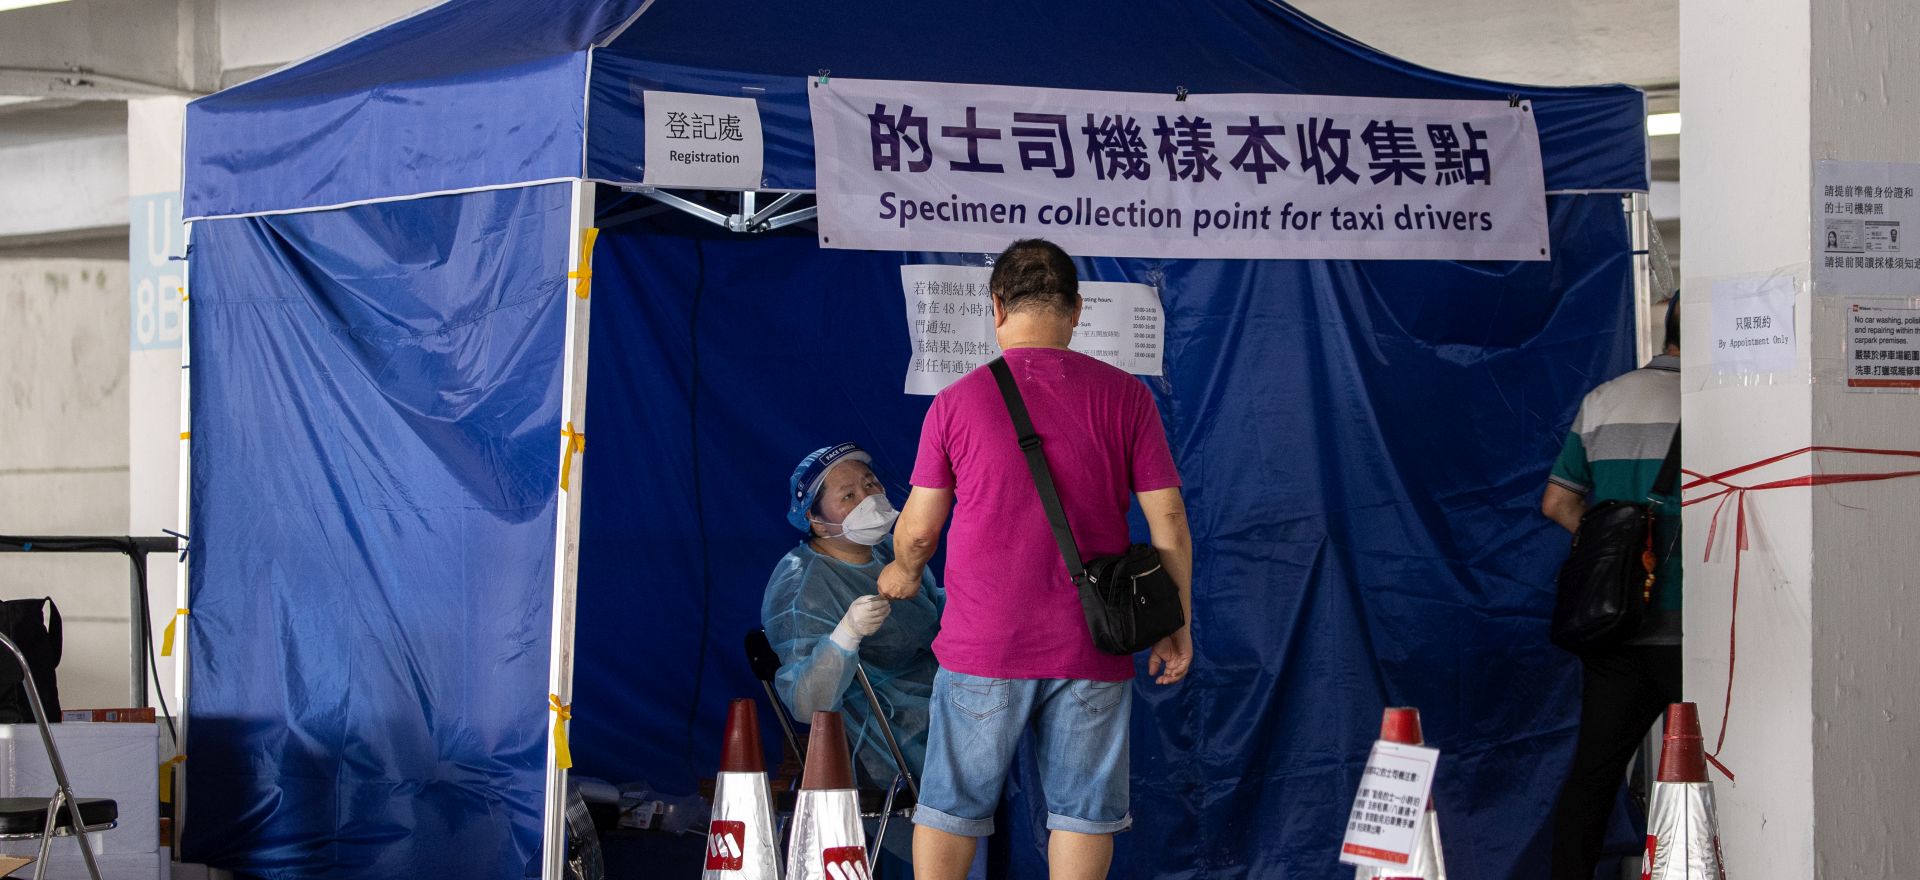 epa08561768 A taxi driver arrives at a makeshift COVID-19 testing lab in a parking lot in Hong Kong, China, 23 July 2020. The city has seen record surges in COVID-19 cases in the past couple of weeks and some health experts have suggested that Hong Kong may have to go into lockdown.  EPA/JEROME FAVRE